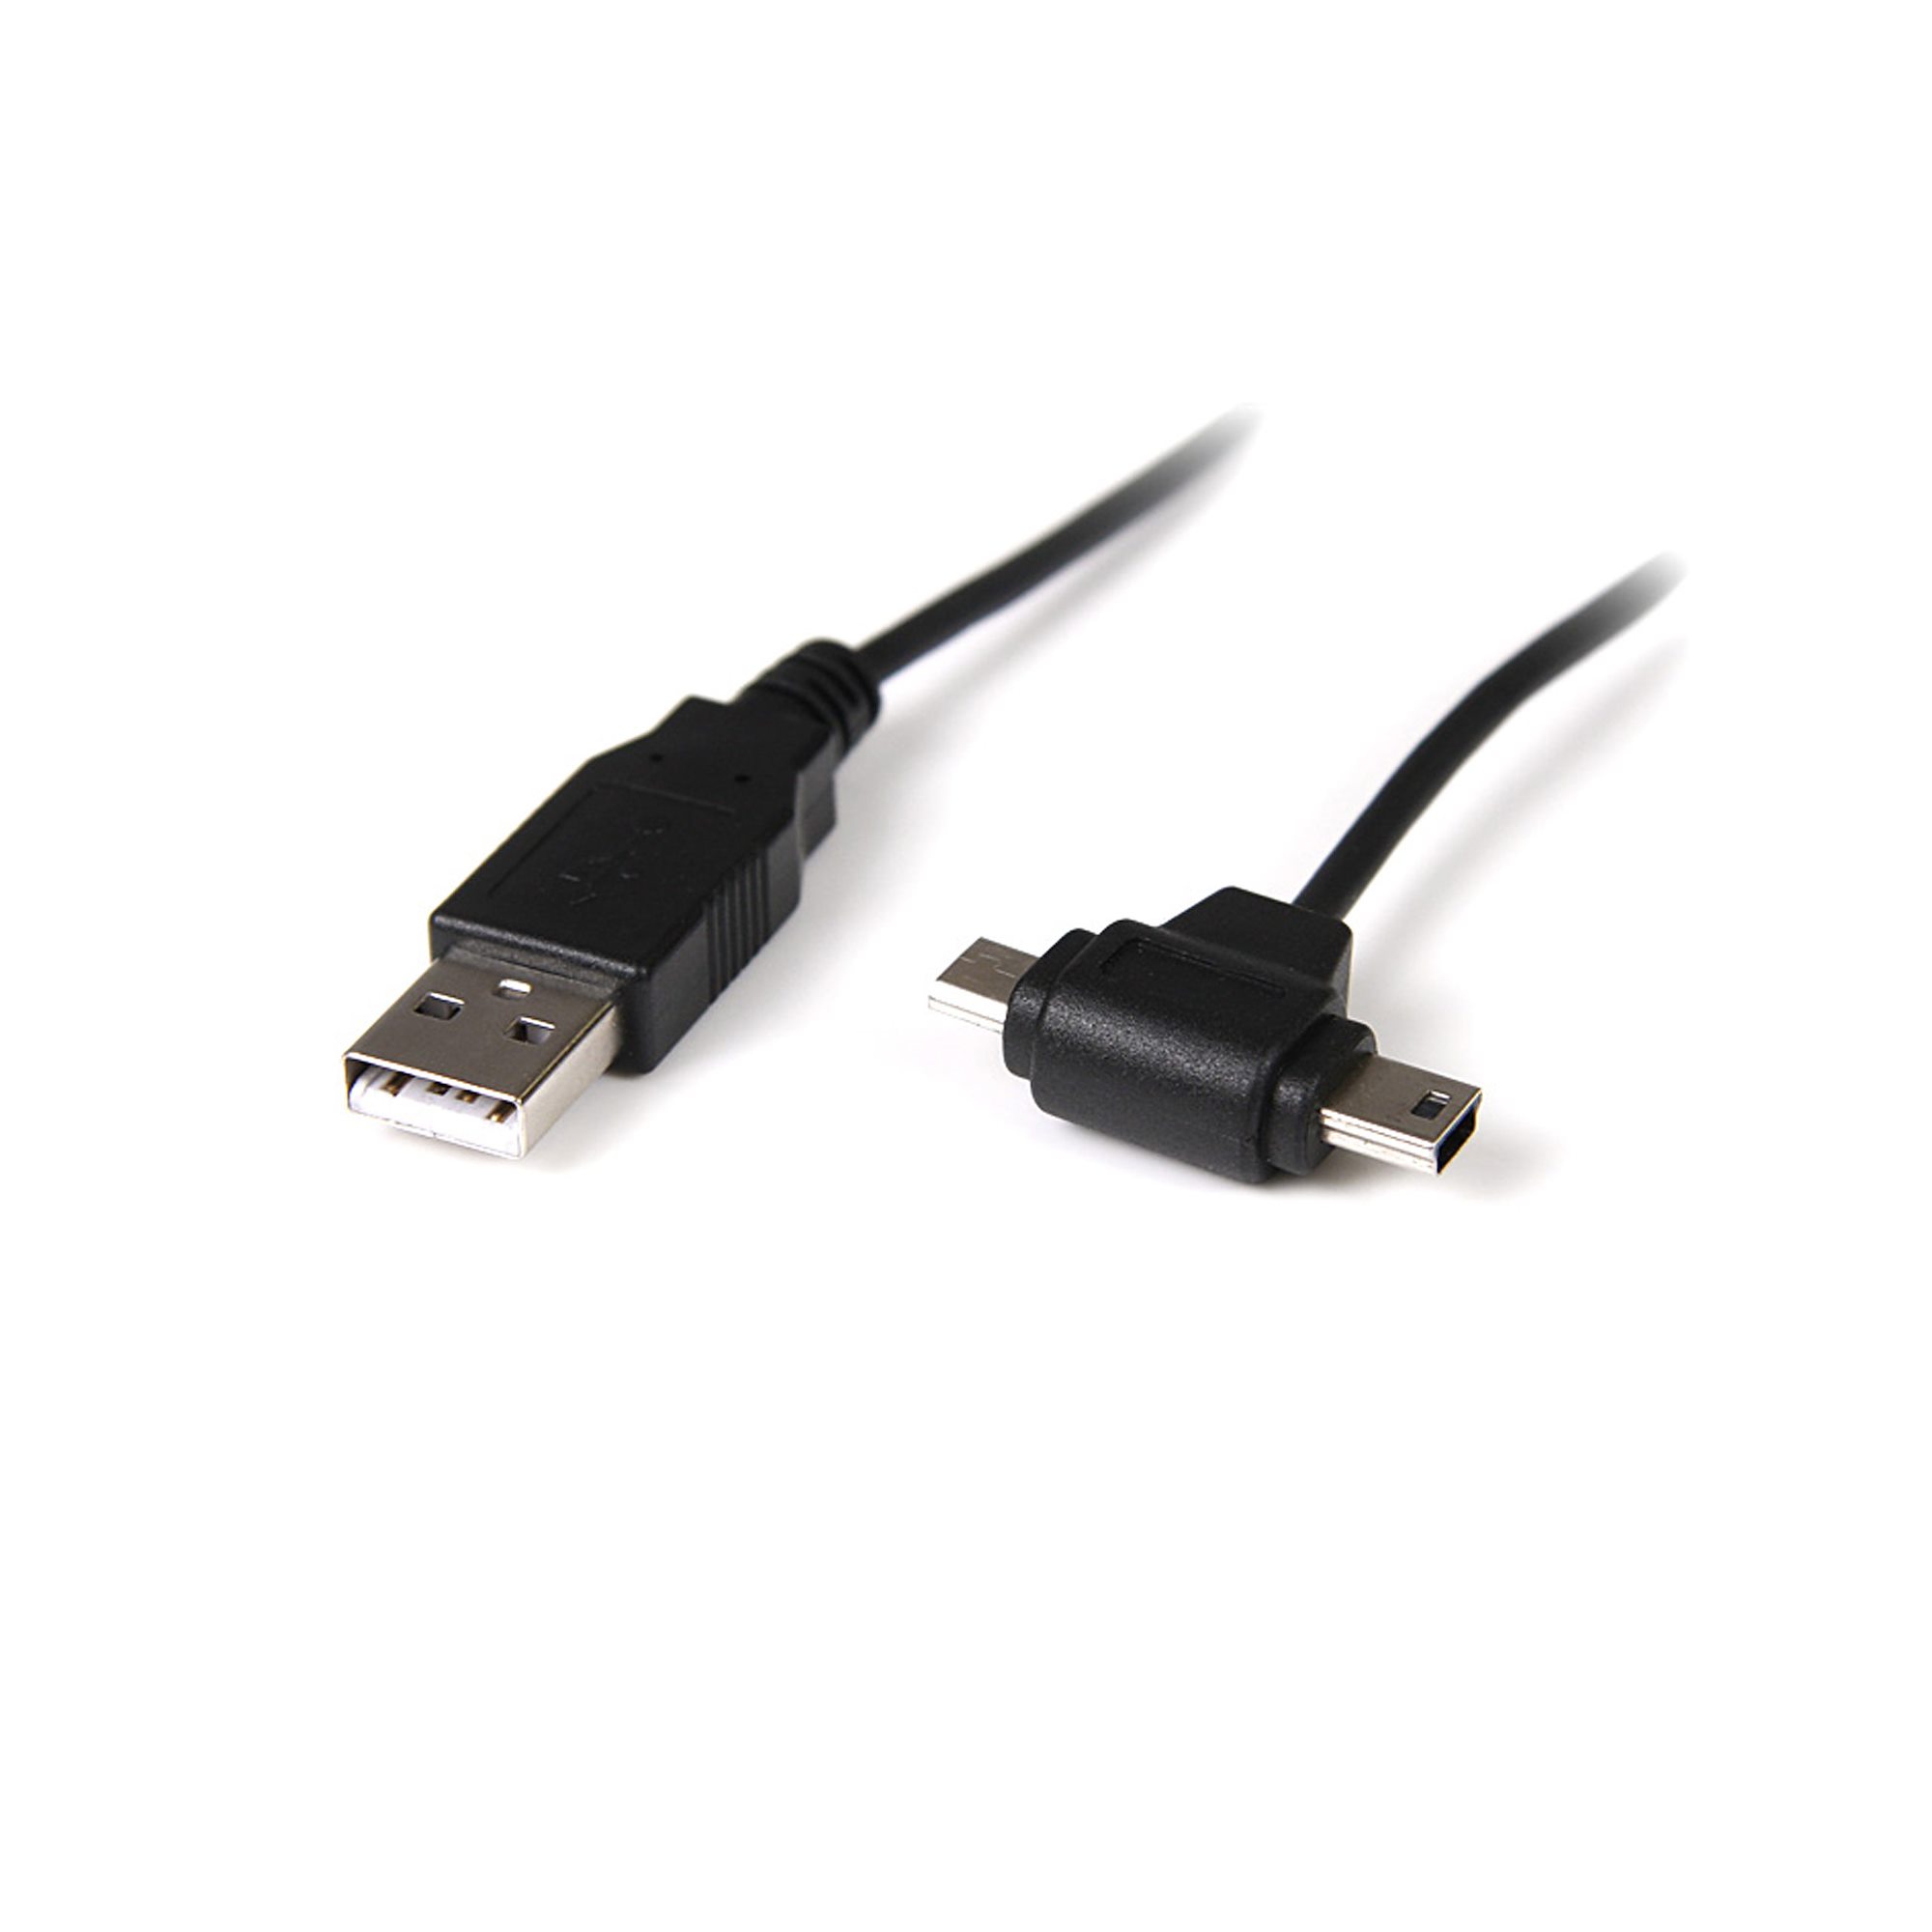 Voorrecht sociaal As USB to Micro USB/Mini USB Combo Cable - Micro USB Cables | StarTech.com